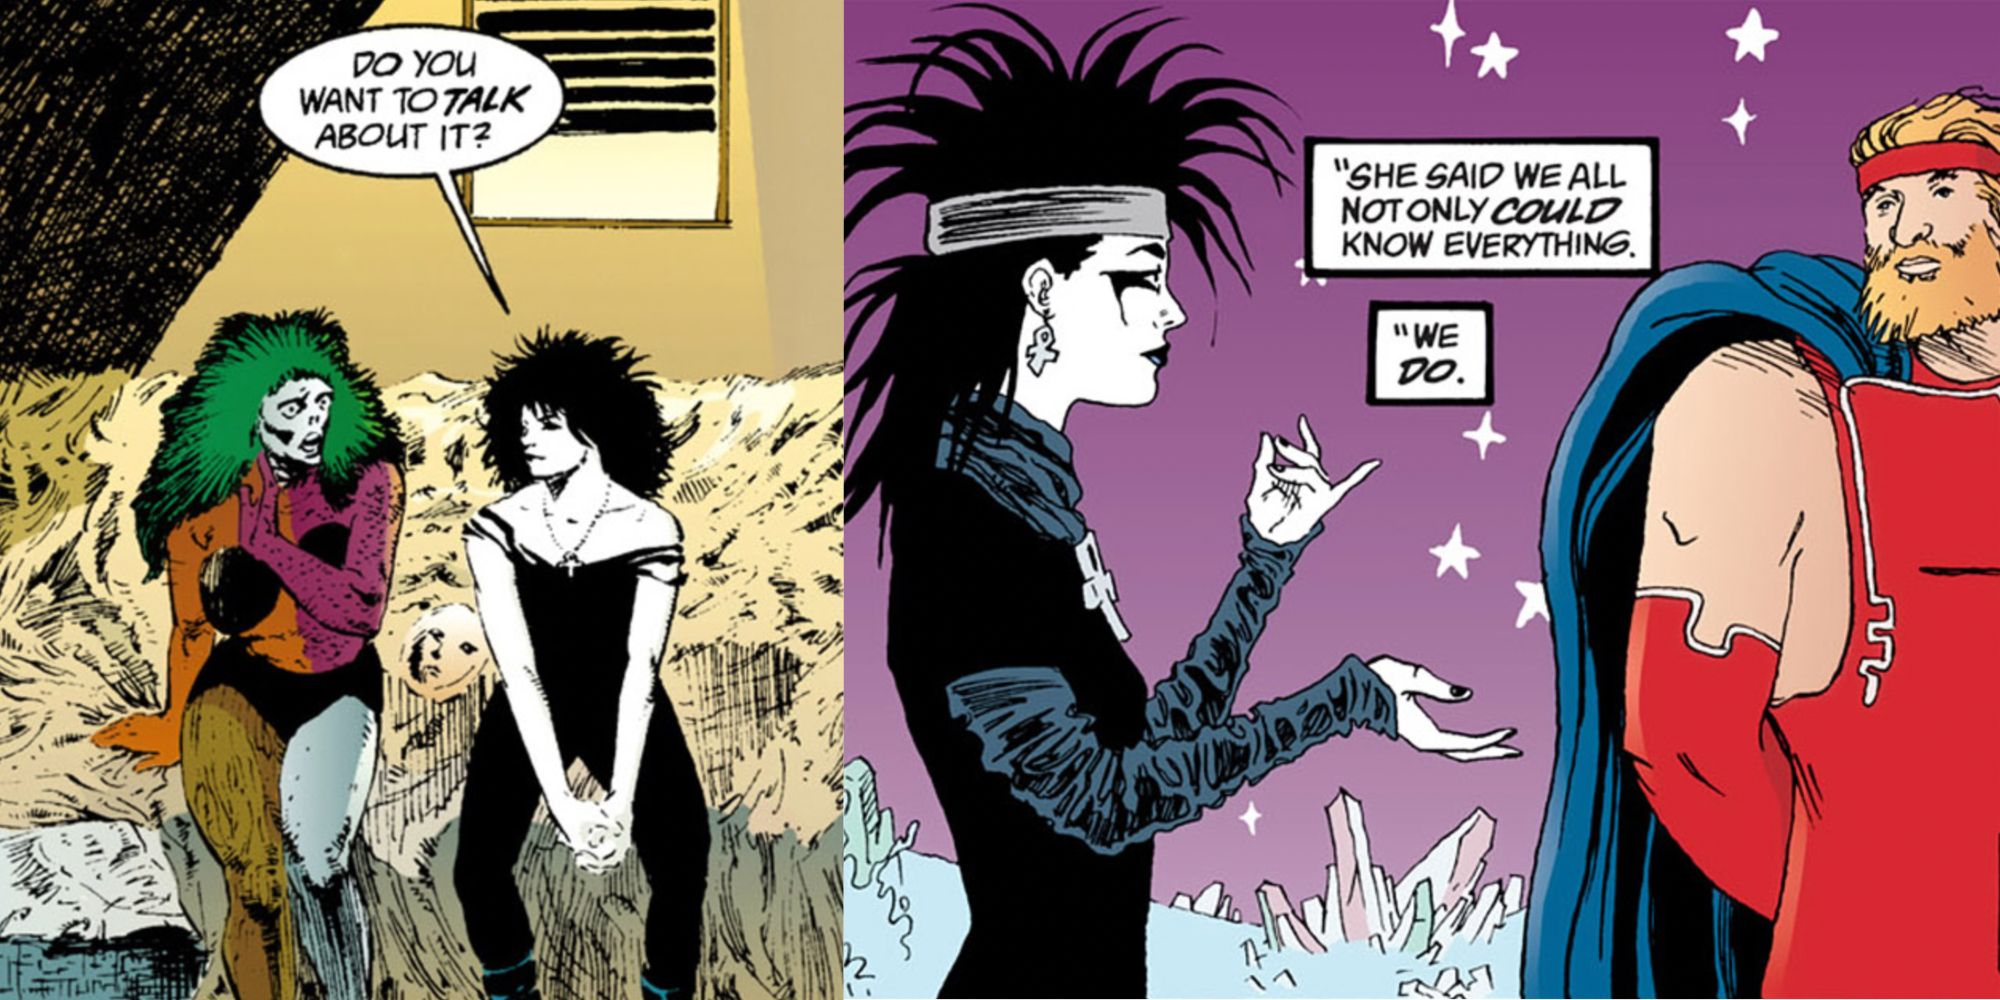 A split image showing characters from the Sandman comics.